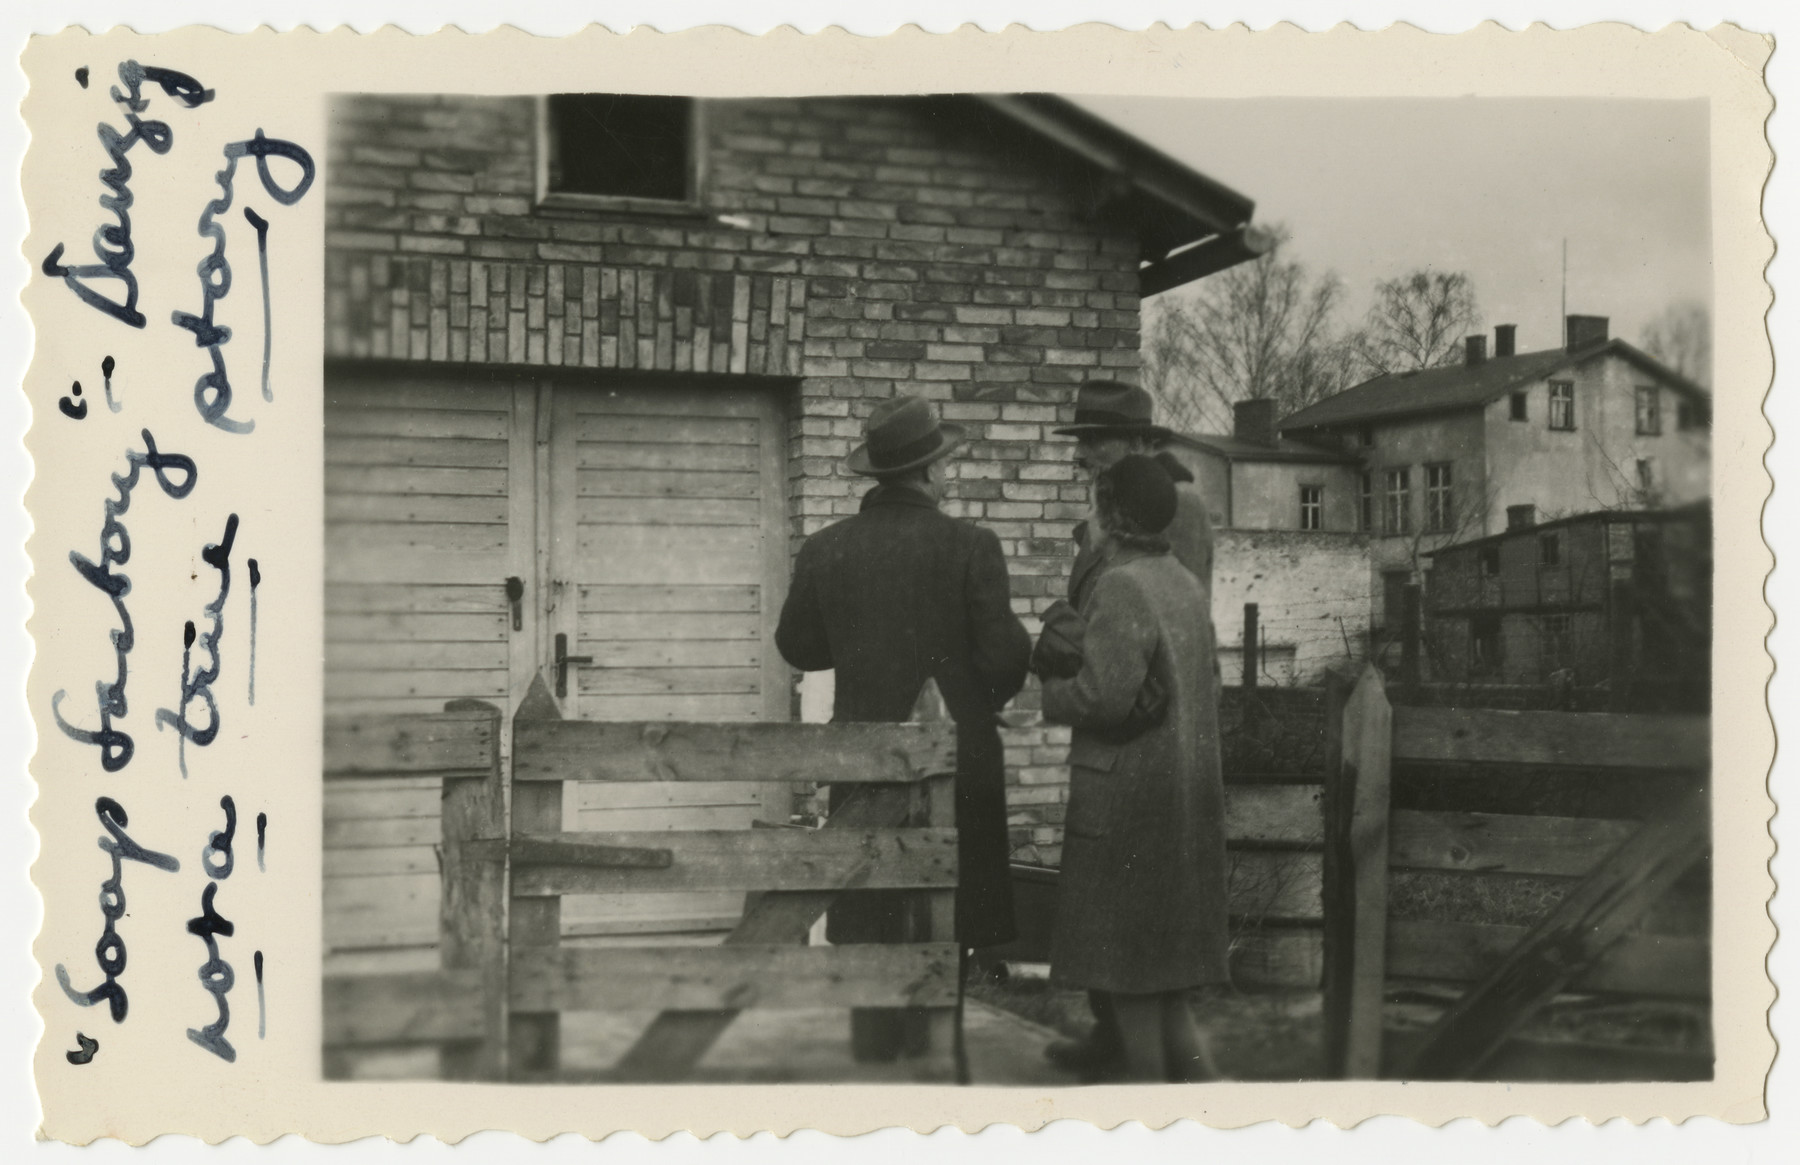 Three people visit the factory where supposedly soap was made from human corpses.  

The original caption reads: "Soap factory -- Danzig.  Not a true story."